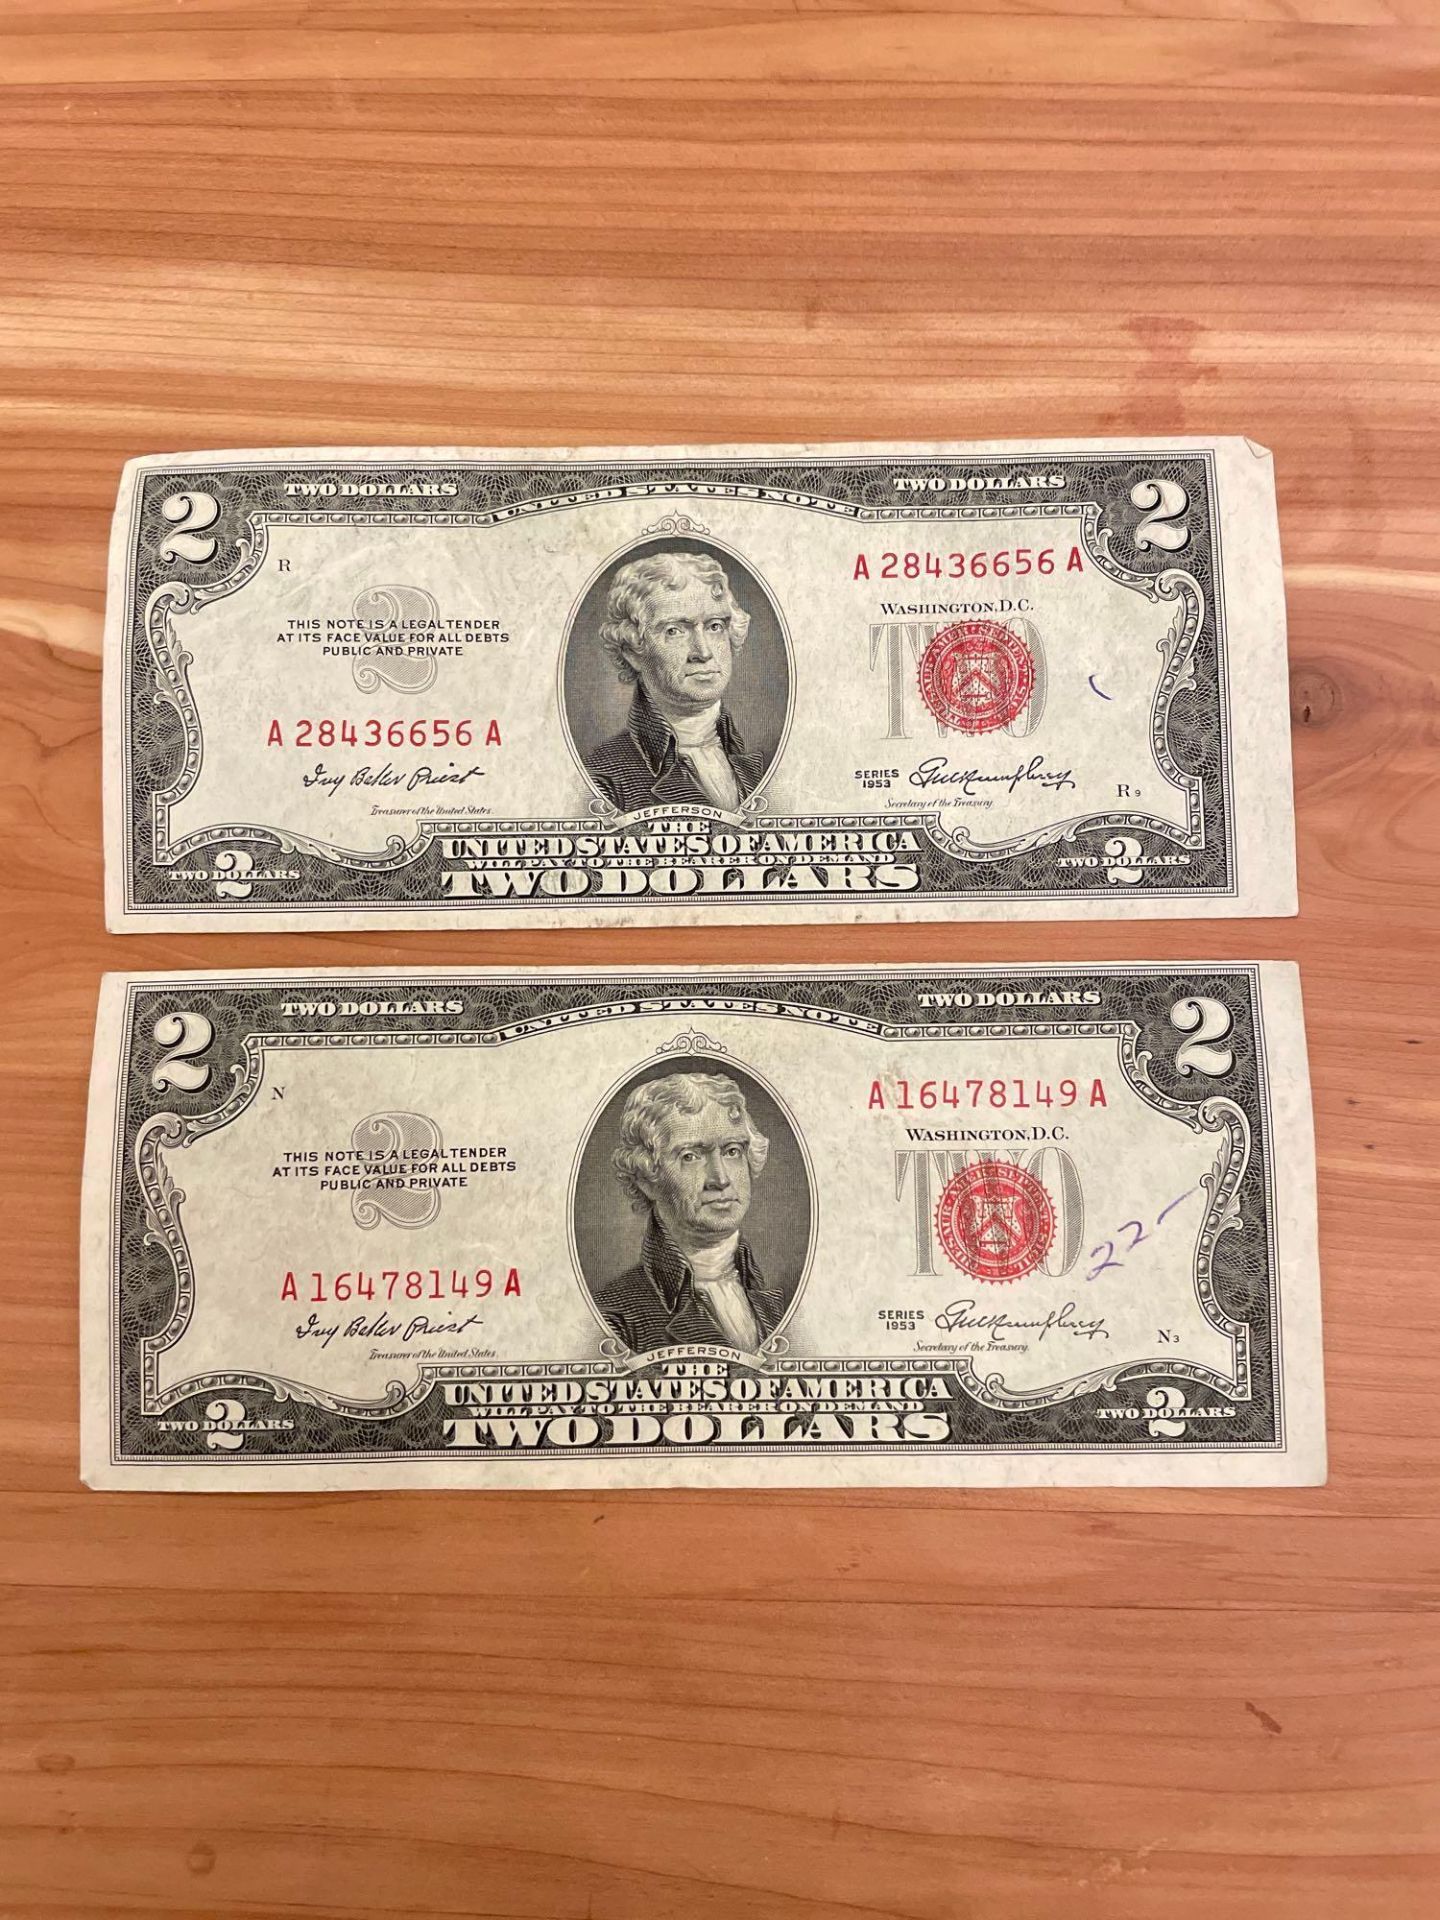 (2) 1953 $ Red Seal Notes (Note with cutting error)